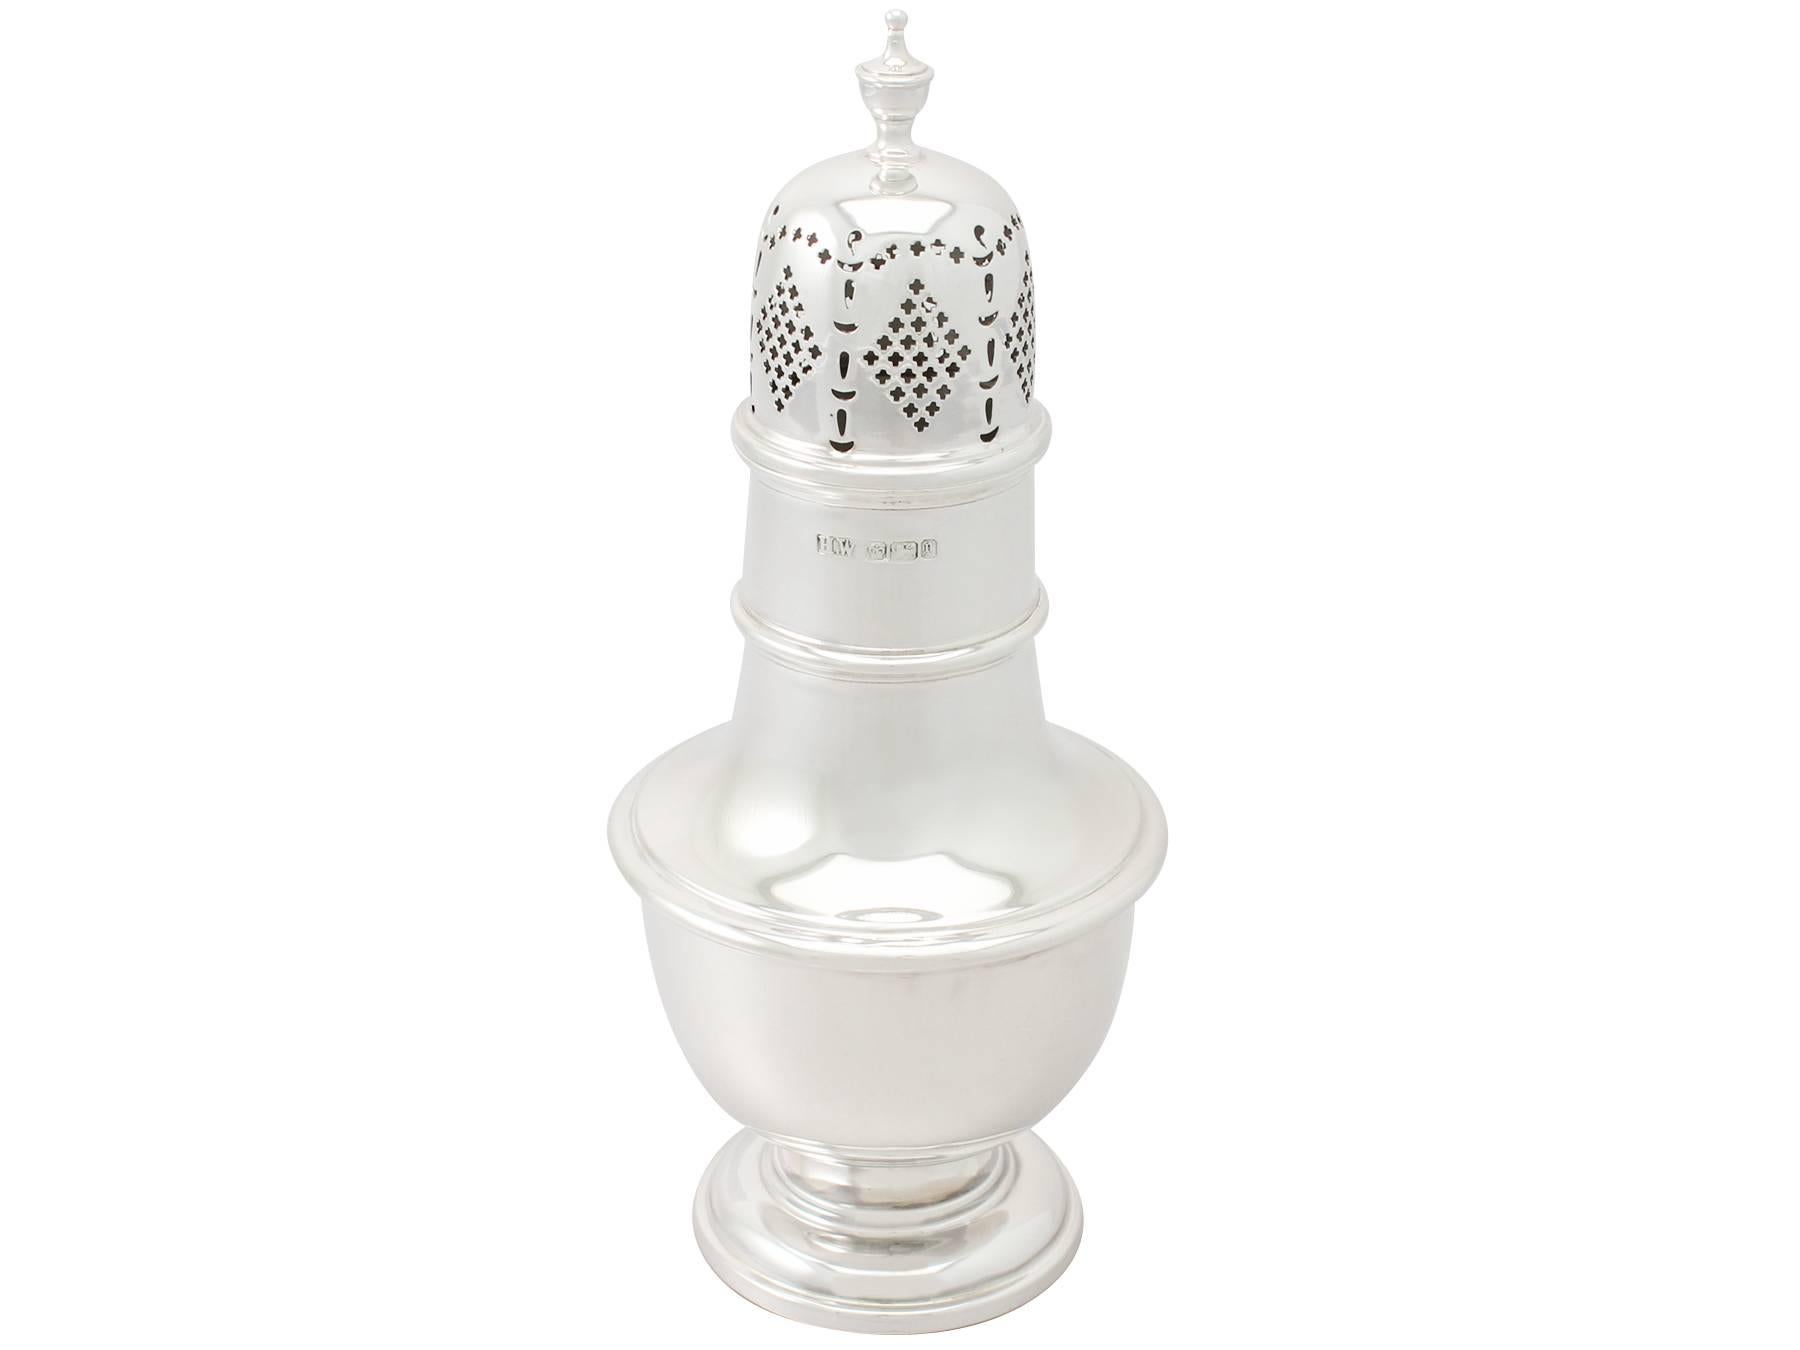 A fine and impressive antique Victorian sterling silver baluster shaped sugar caster, made by Lee & Wigfull ; part of our antique silver teaware collection.

This impressive antique Victorian sterling silver sugar caster has a plain baluster shaped